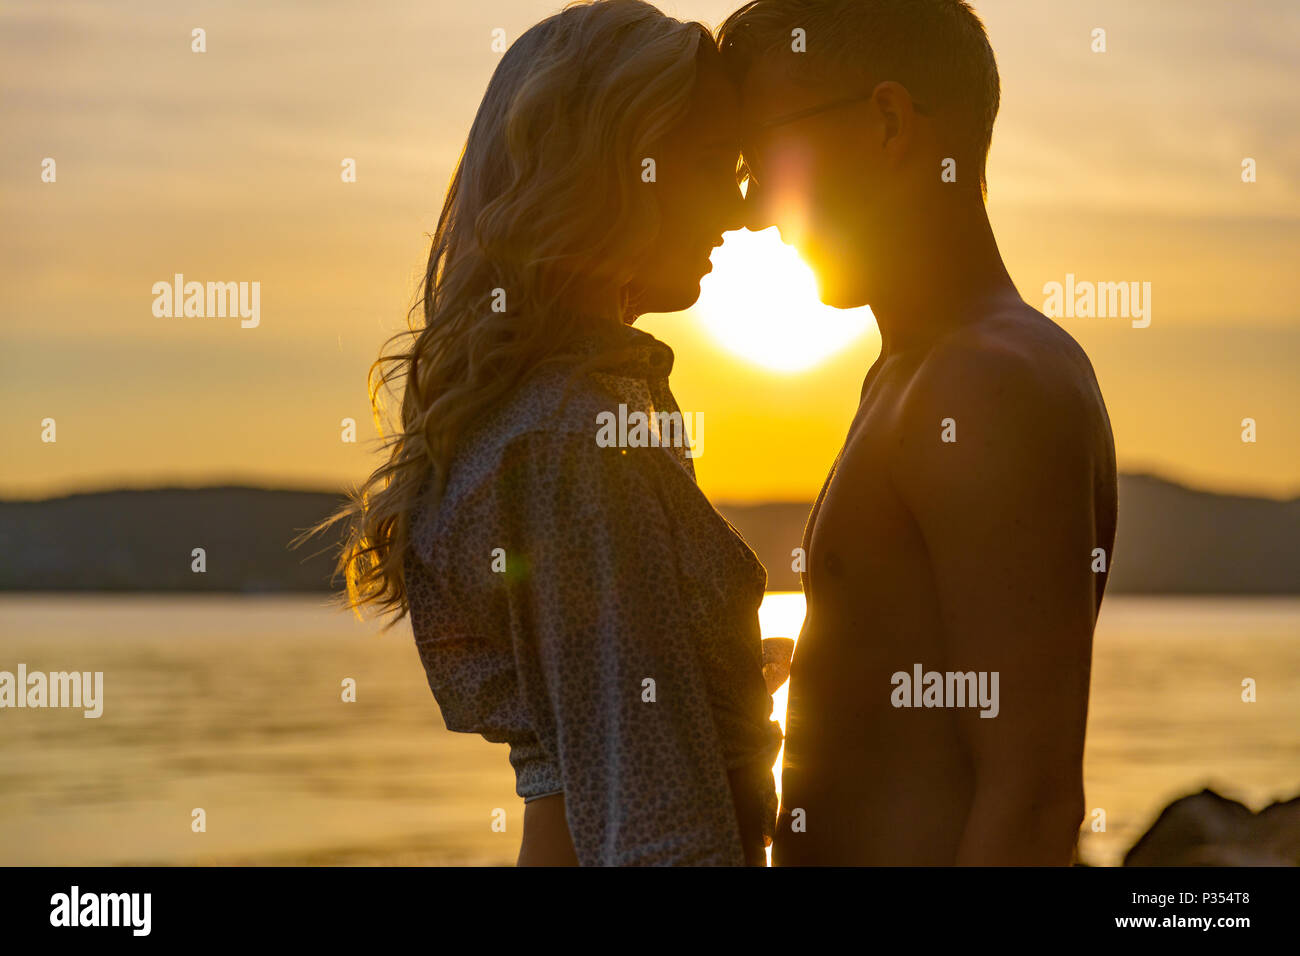 Silhouette of couple in love embracing at the beach against sun Stock Photo